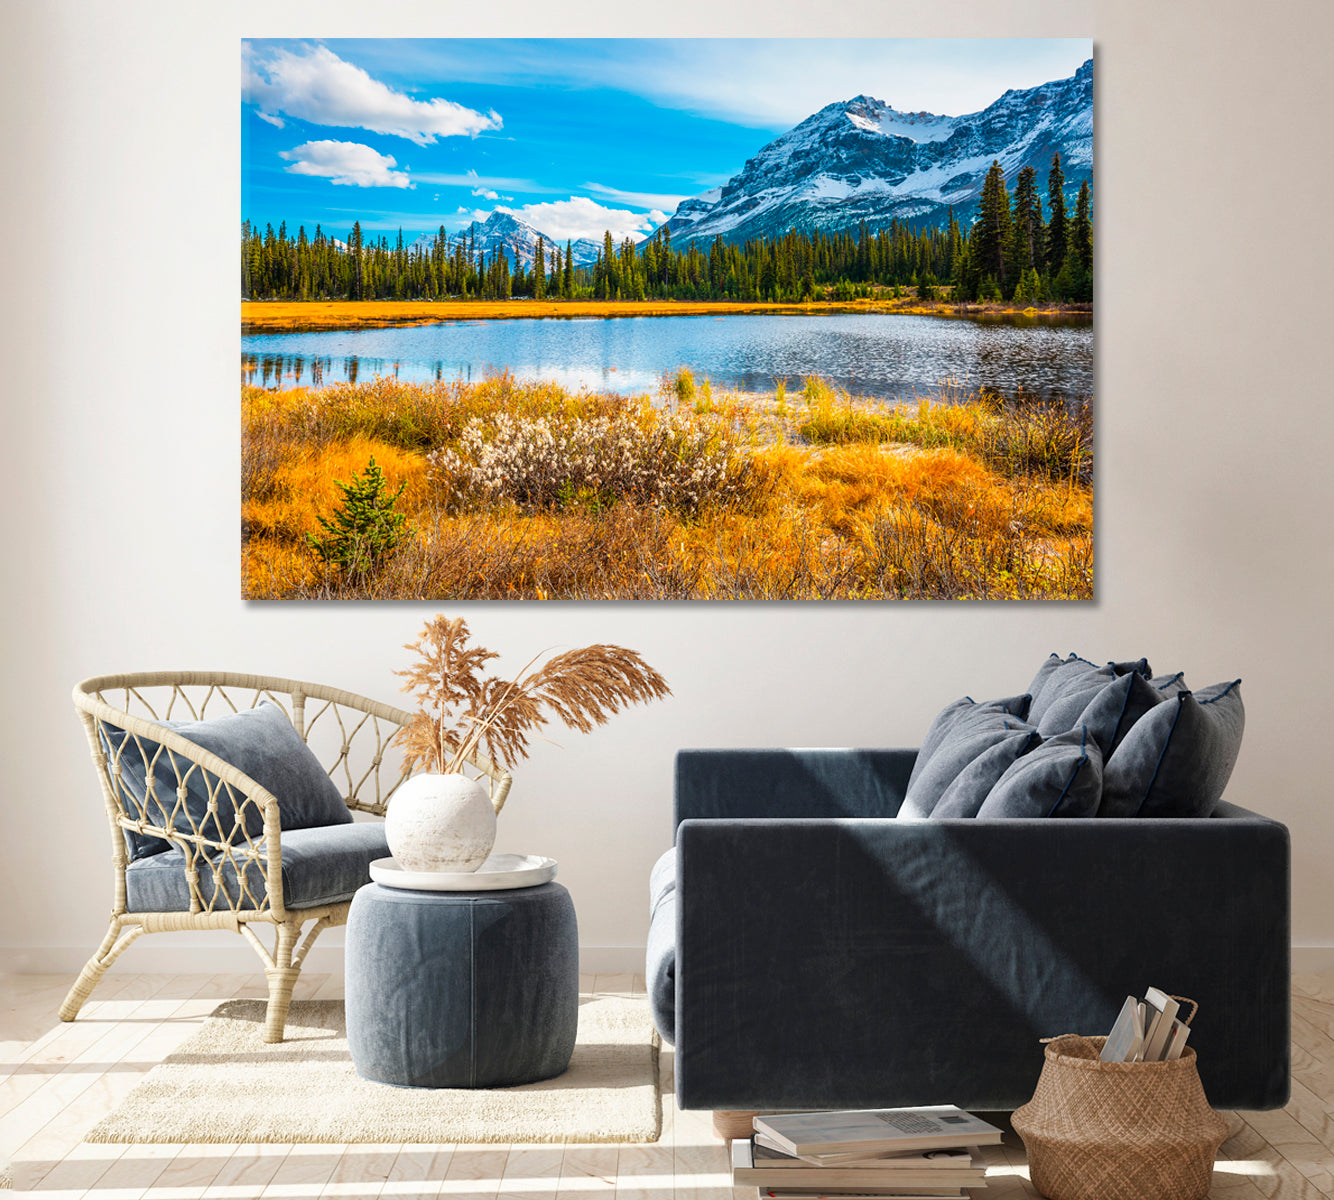 Canada Landscape with Mountains and Forest Canvas Print ArtLexy 1 Panel 24"x16" inches 